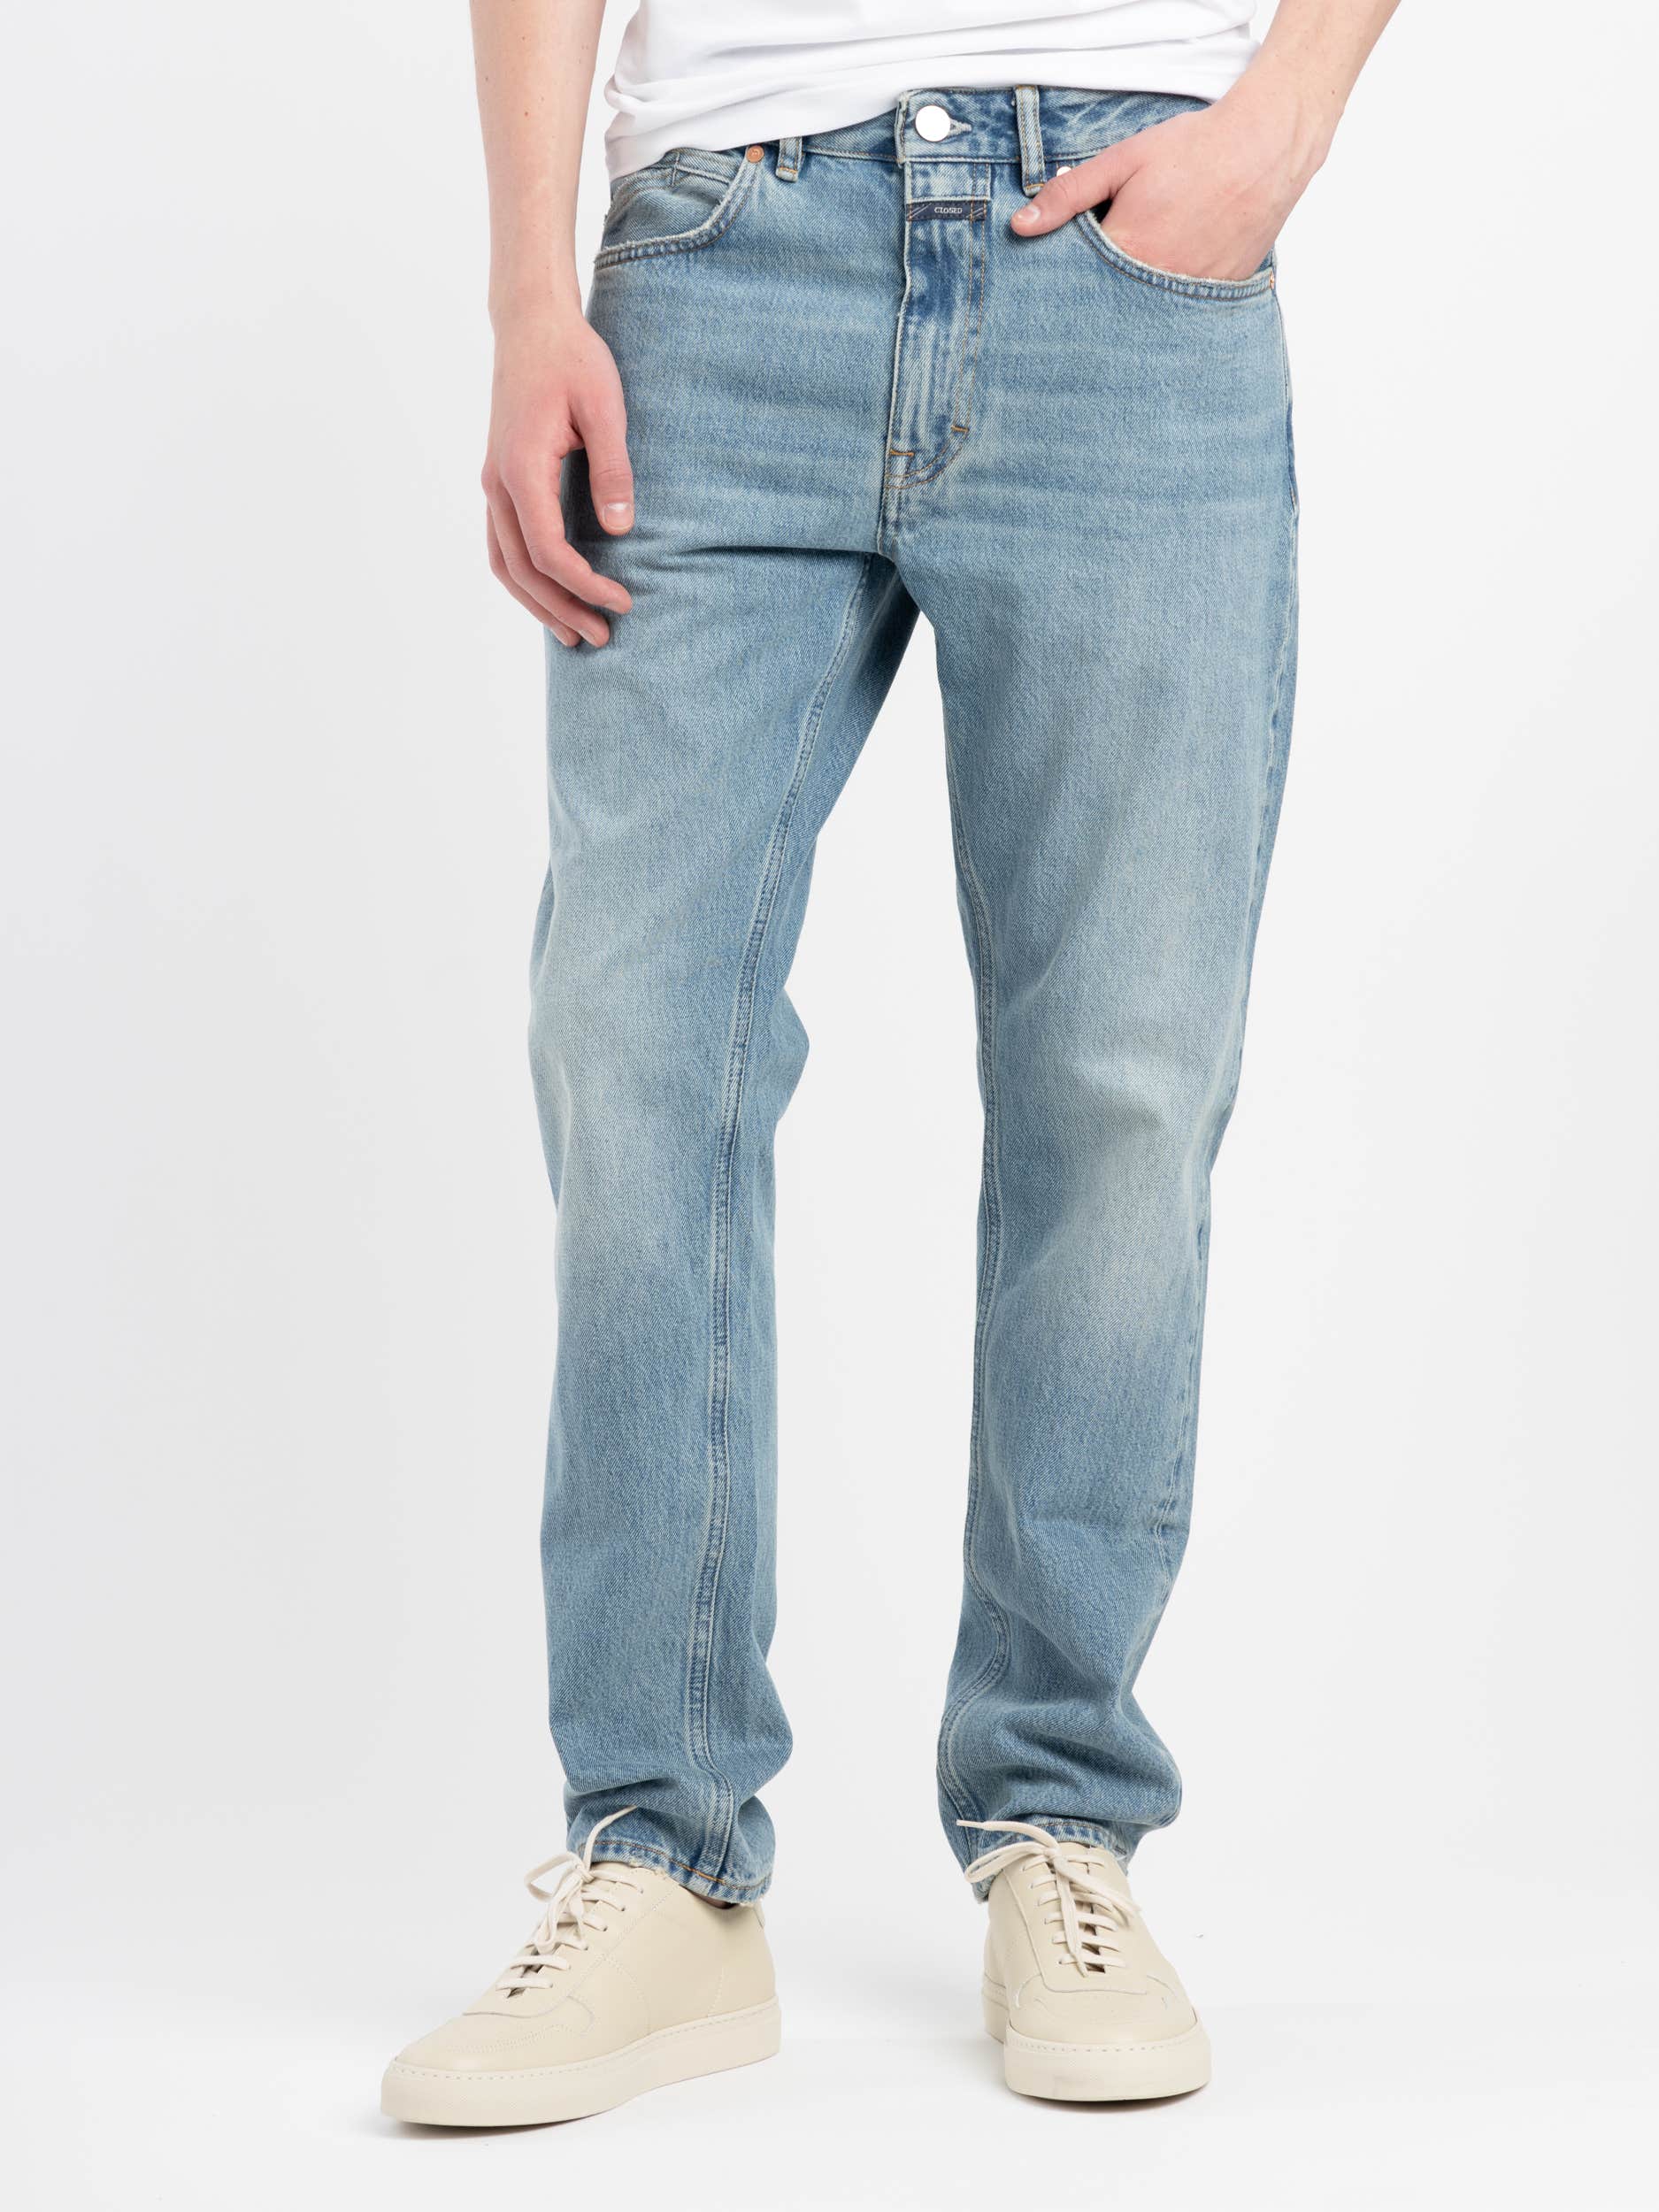 Buy Navy Blue Regular Tapered Stretch Utility Cargo Trousers from Next USA